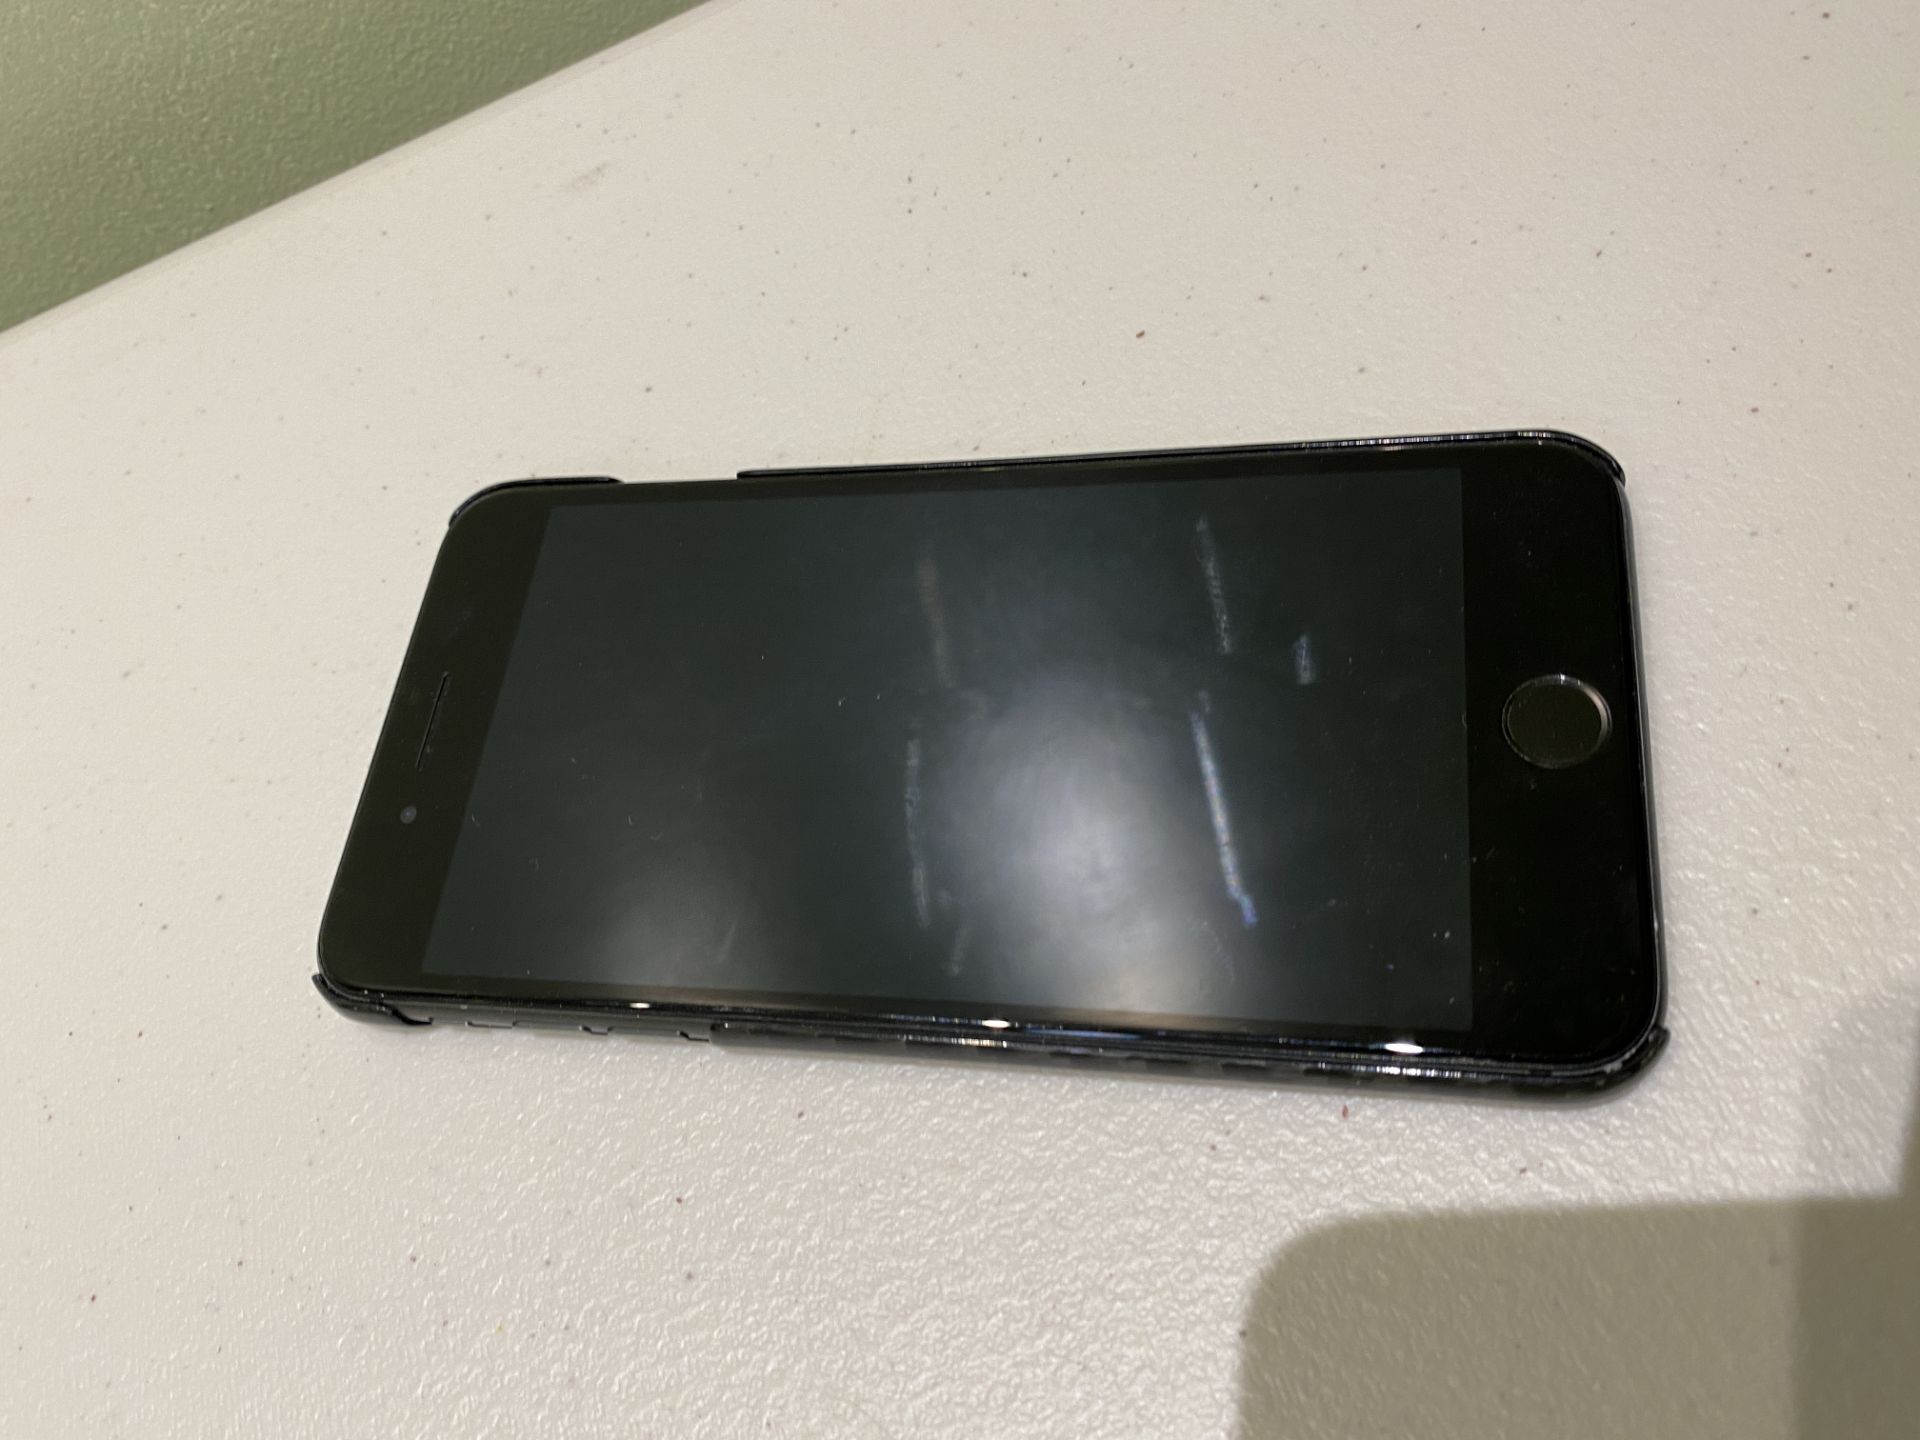 Apple Iphone 6 Plus 64 GB - Black - Had New Screen Fitted, Which is Now Unresponsive - Has Been Fact - Image 4 of 5